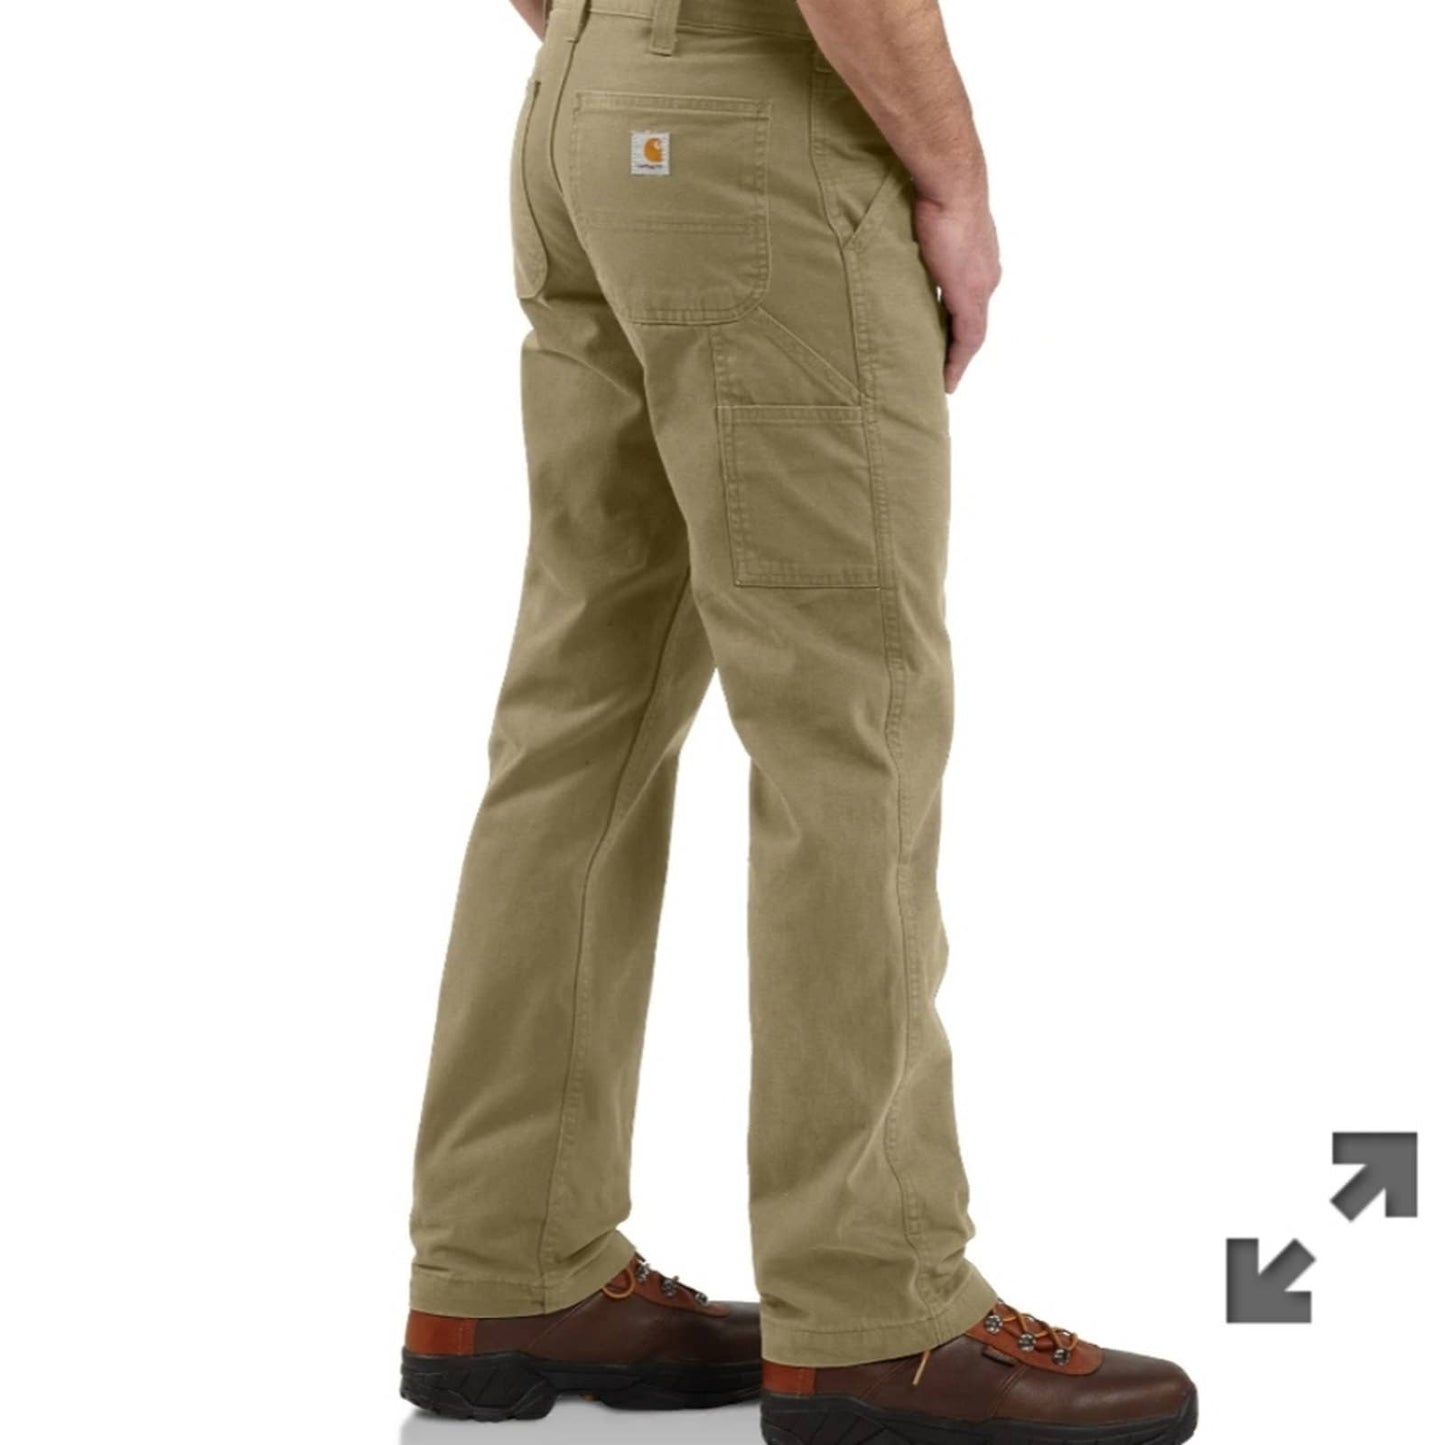 Carhartt Relaxed Fit Twill Utility Work Pants - 34